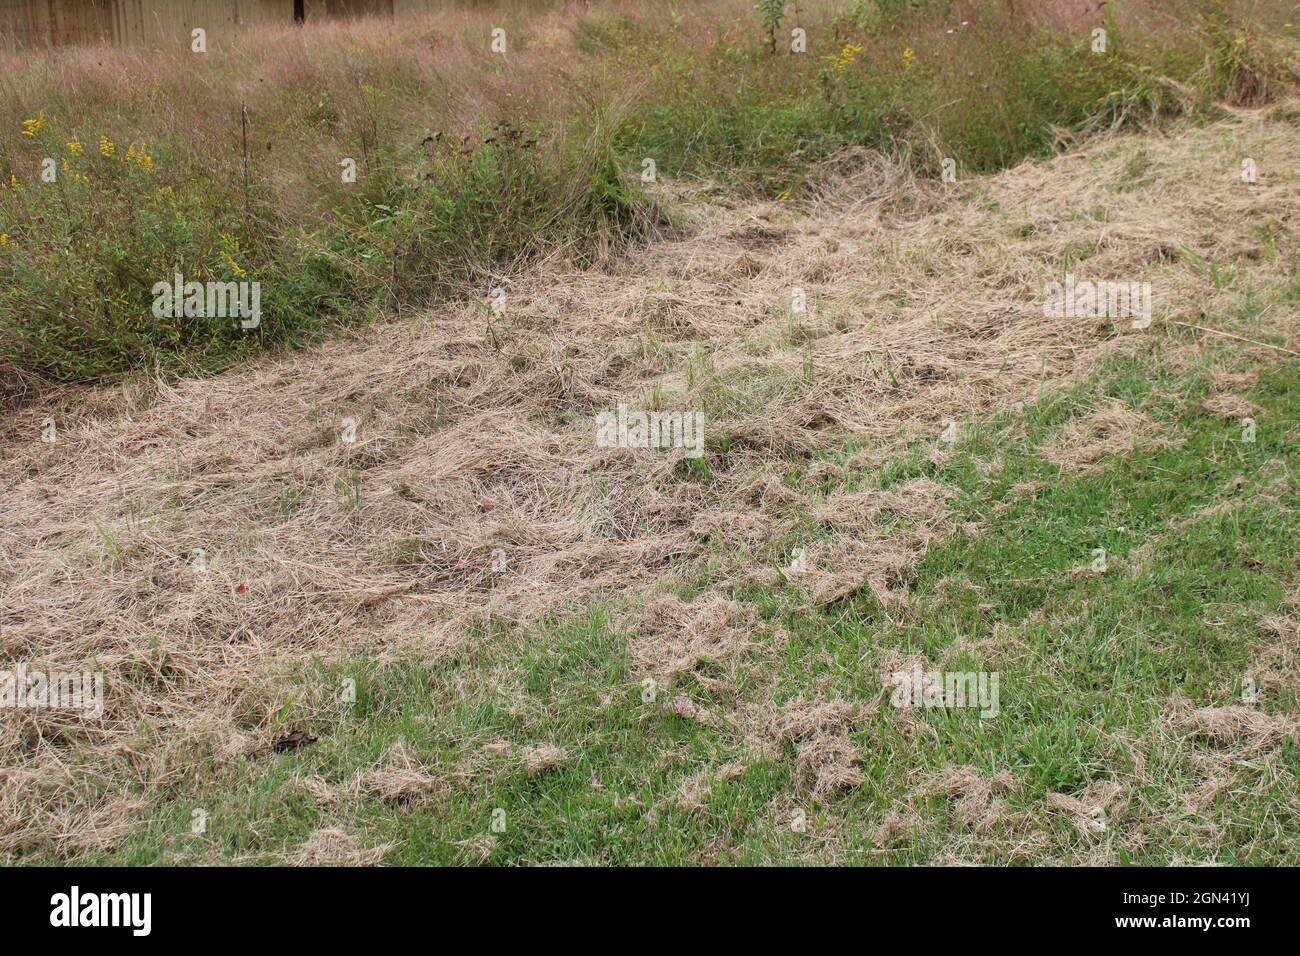 Dead Grass Clippings from a Mowed Field Edge Stock Photo